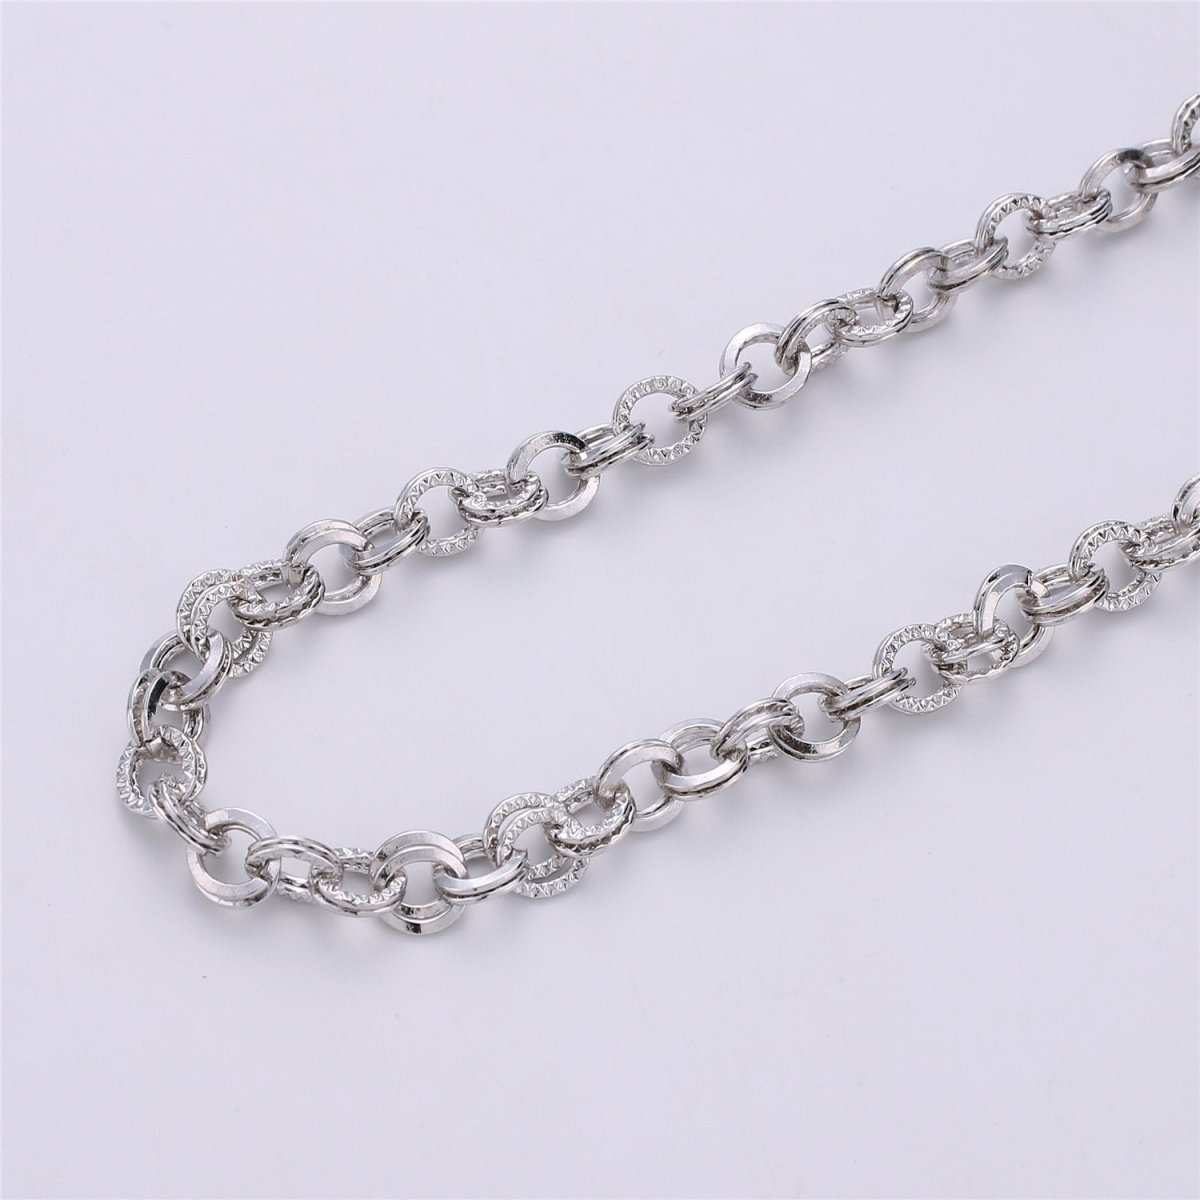 7mm Width White Gold / 14K Gold Filled Textured Necklace Bracelet Rolo Chain | ROLL-096, ROLL-097 Clearance Pricing - DLUXCA